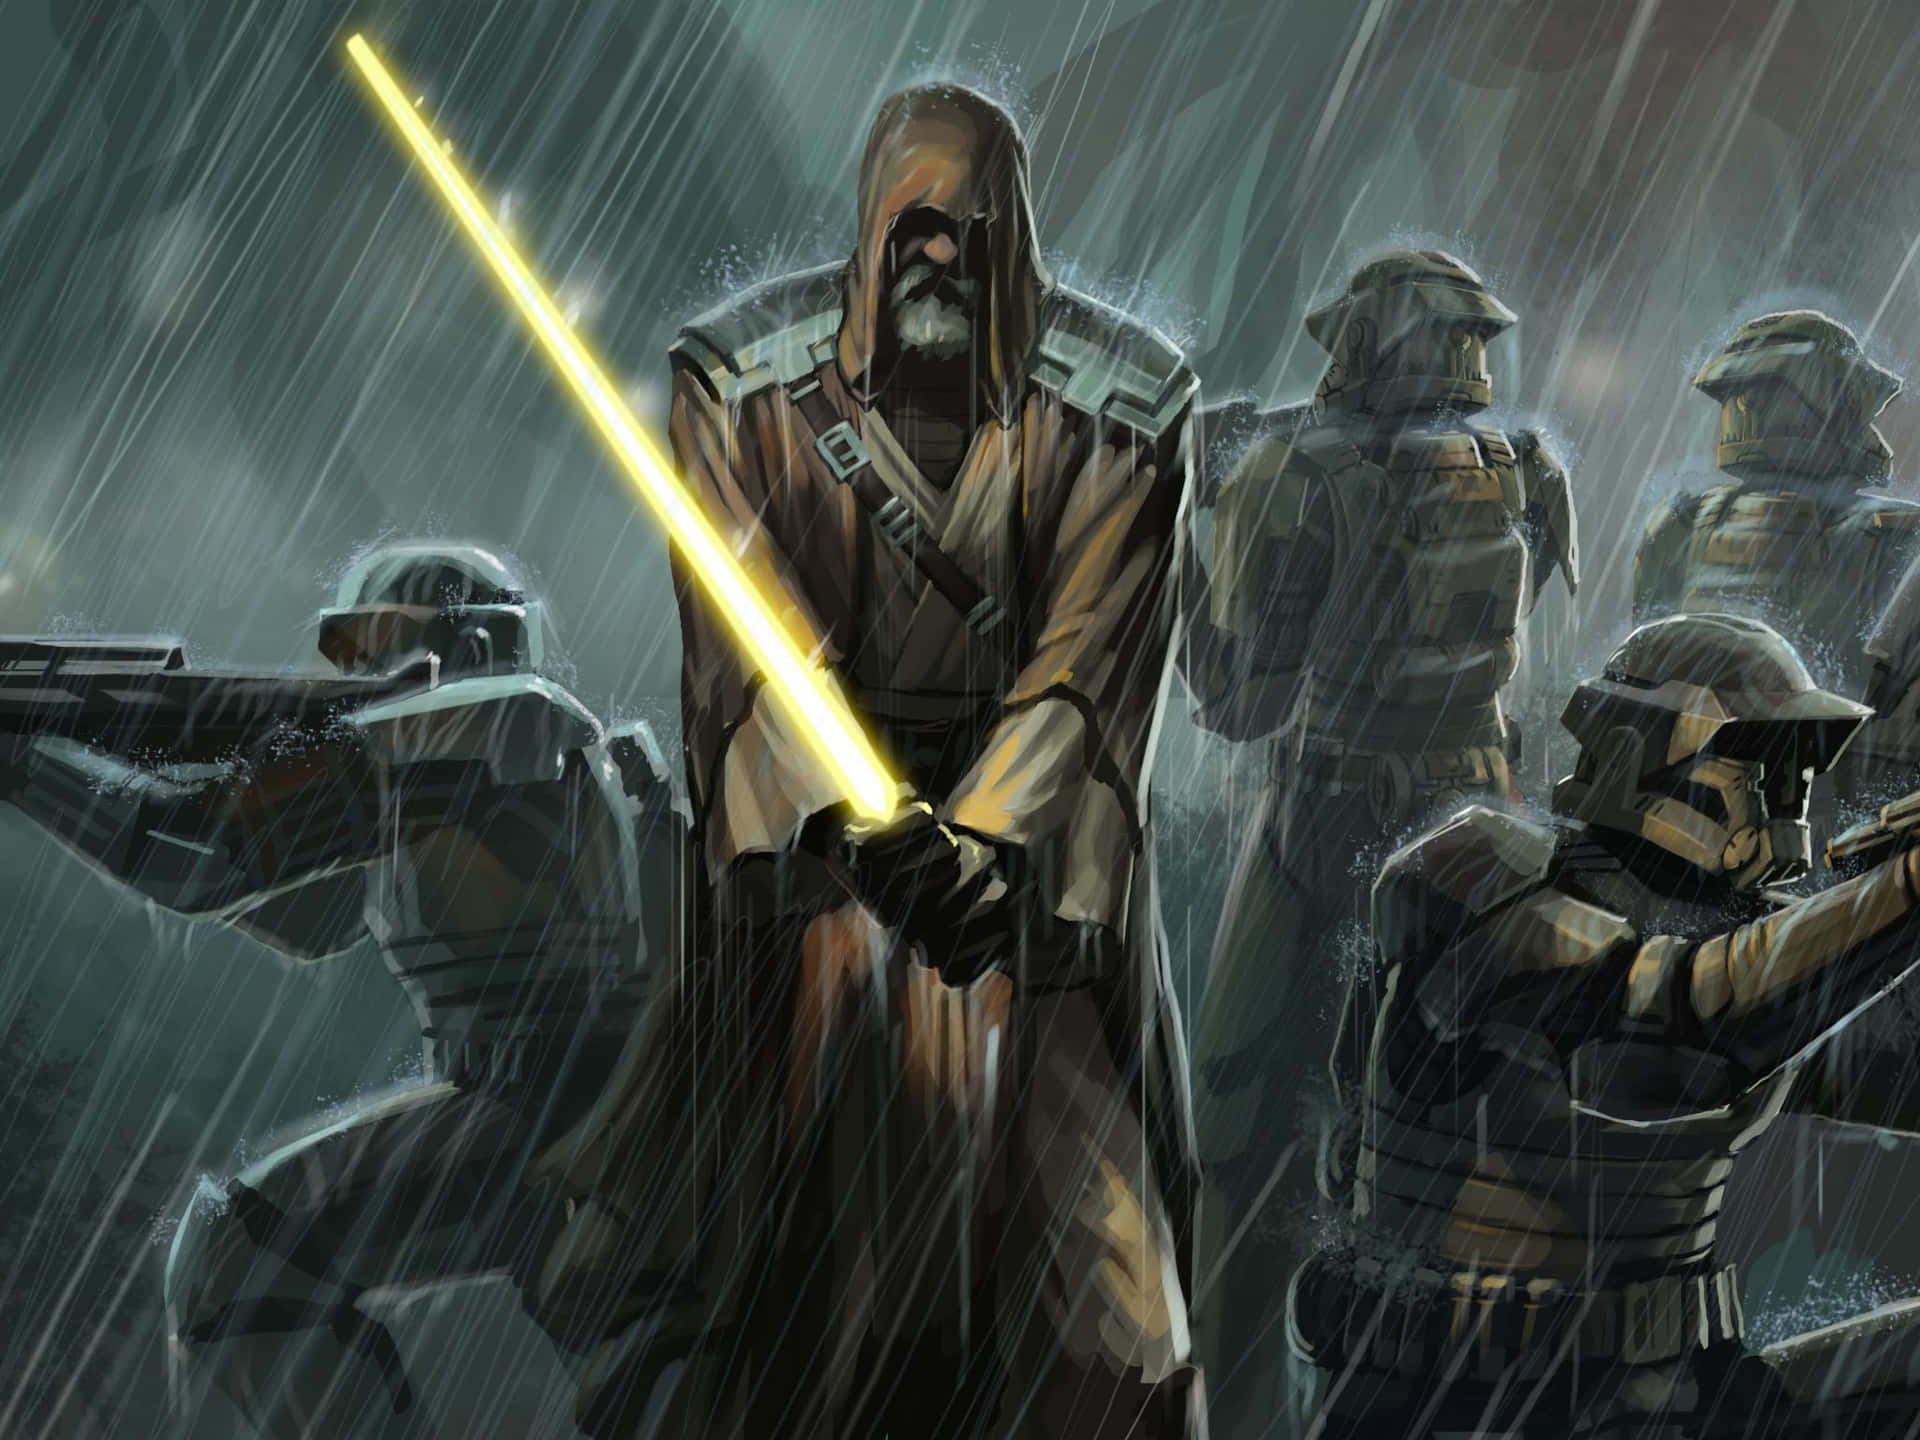 Anakin Skywalker Leads The Army In The Clone Wars